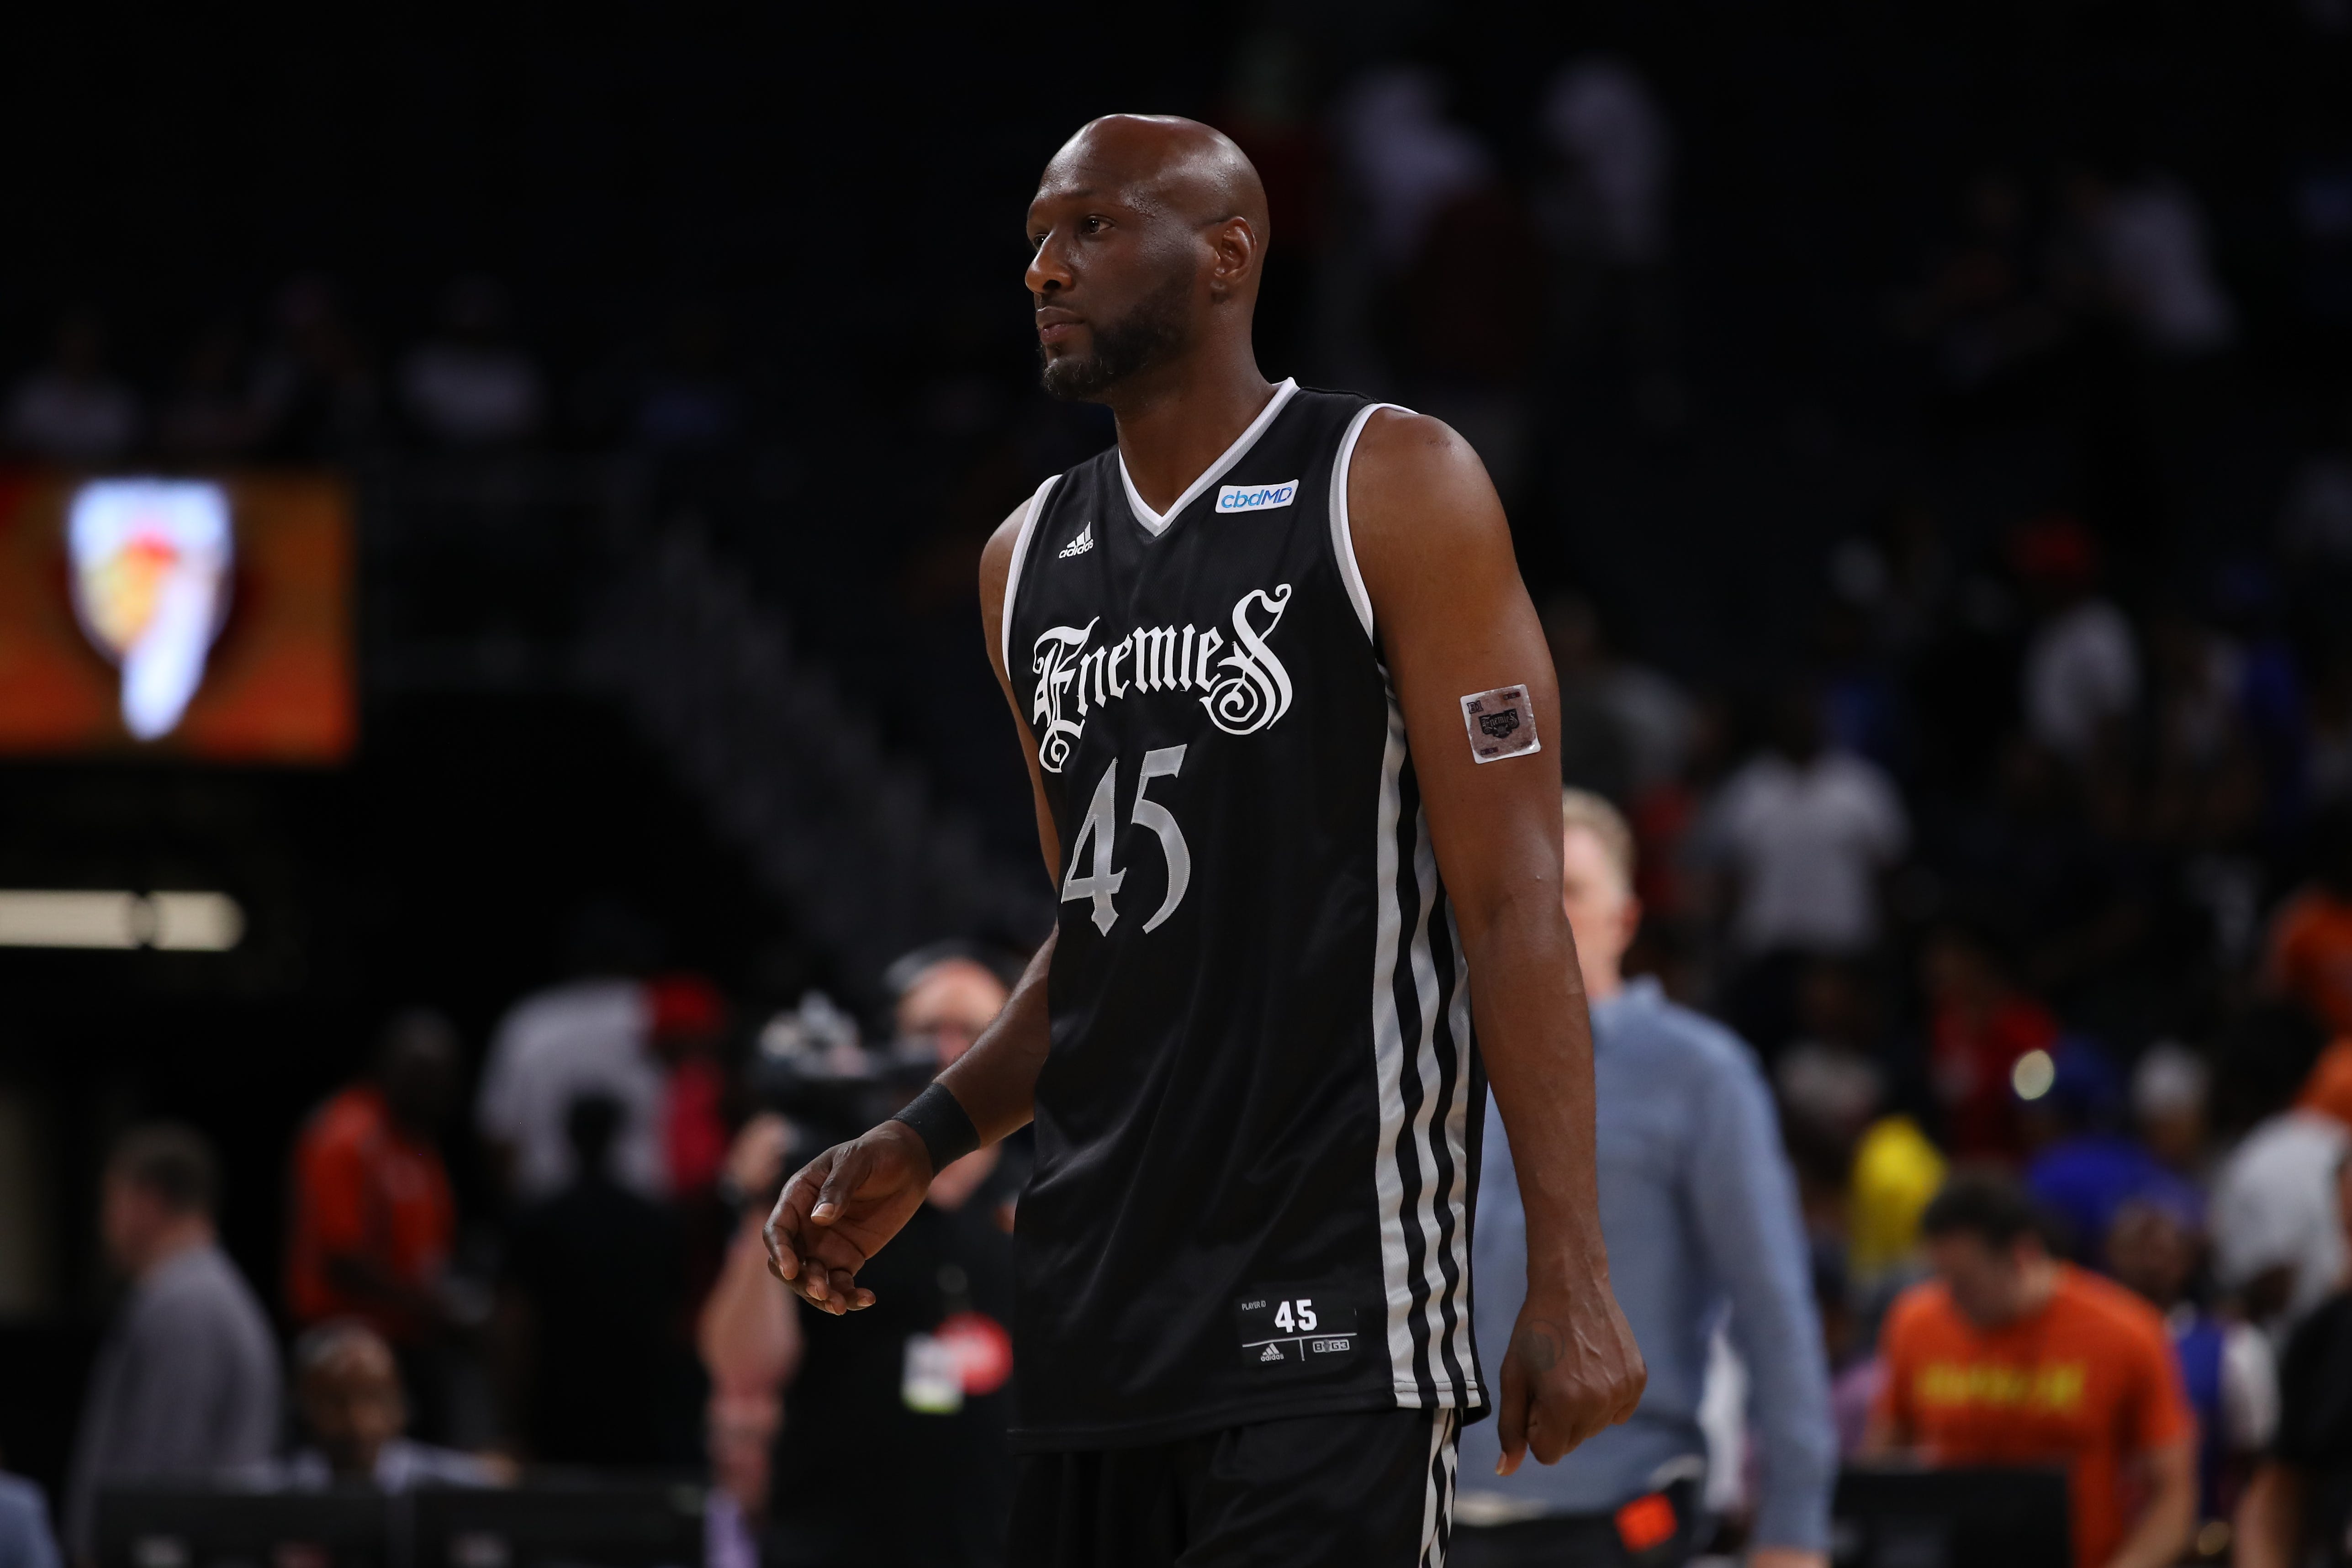 Lamar Odom, other ex-NBA stars &apos;deactivated&apos; from Big3 league